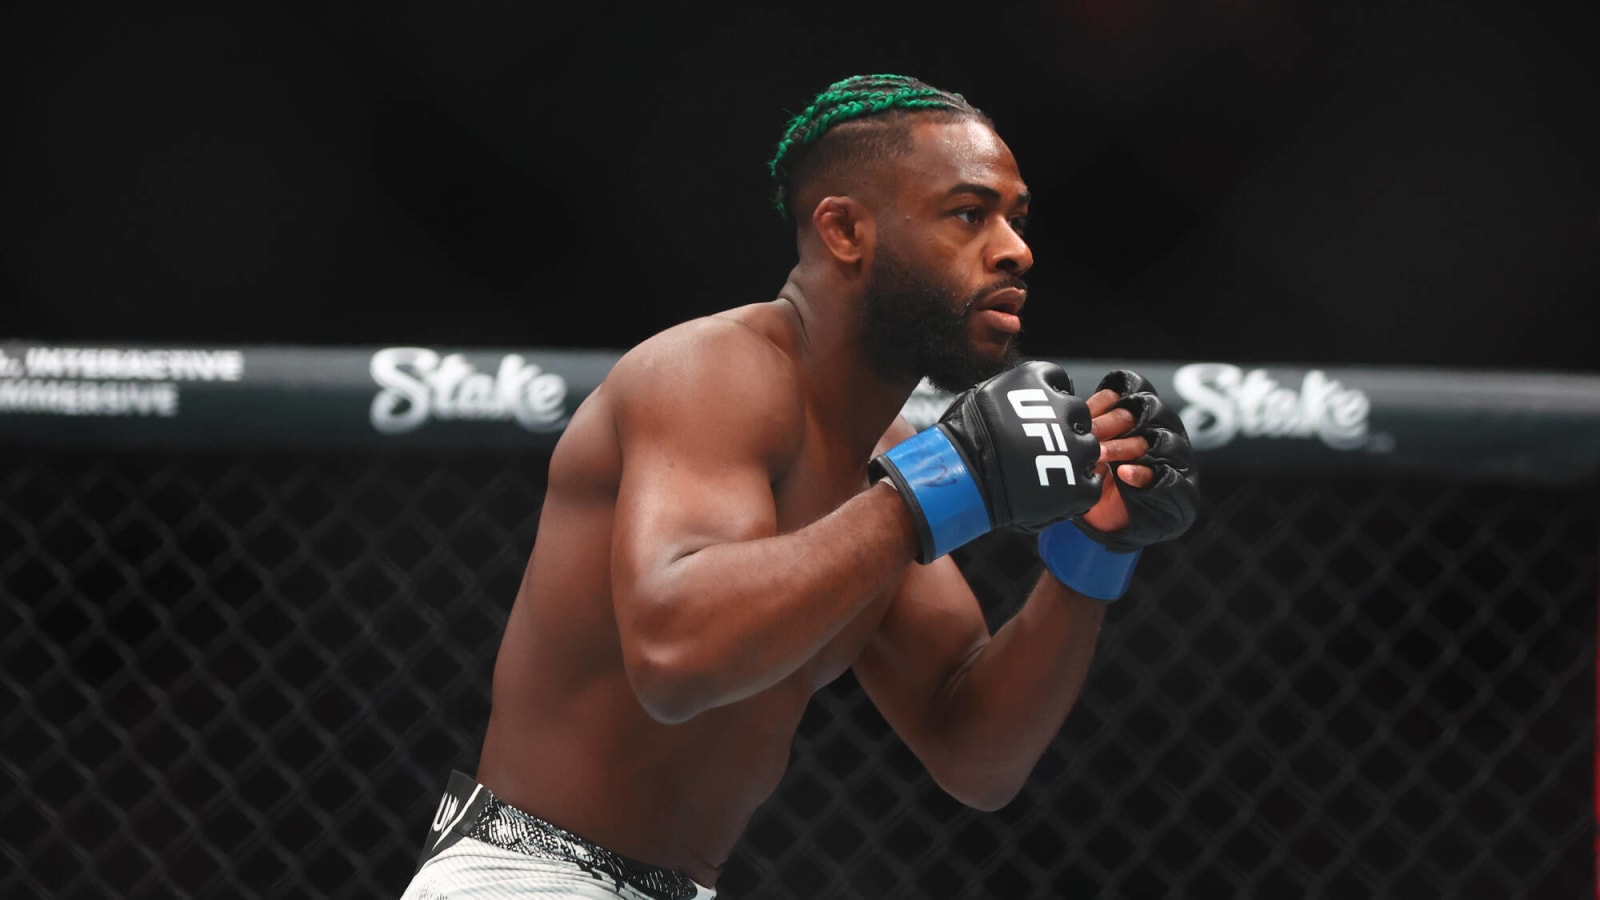 Aljamain Sterling demands time to cut weight the ‘proper way’ and he’ll beat Sean O’Malley